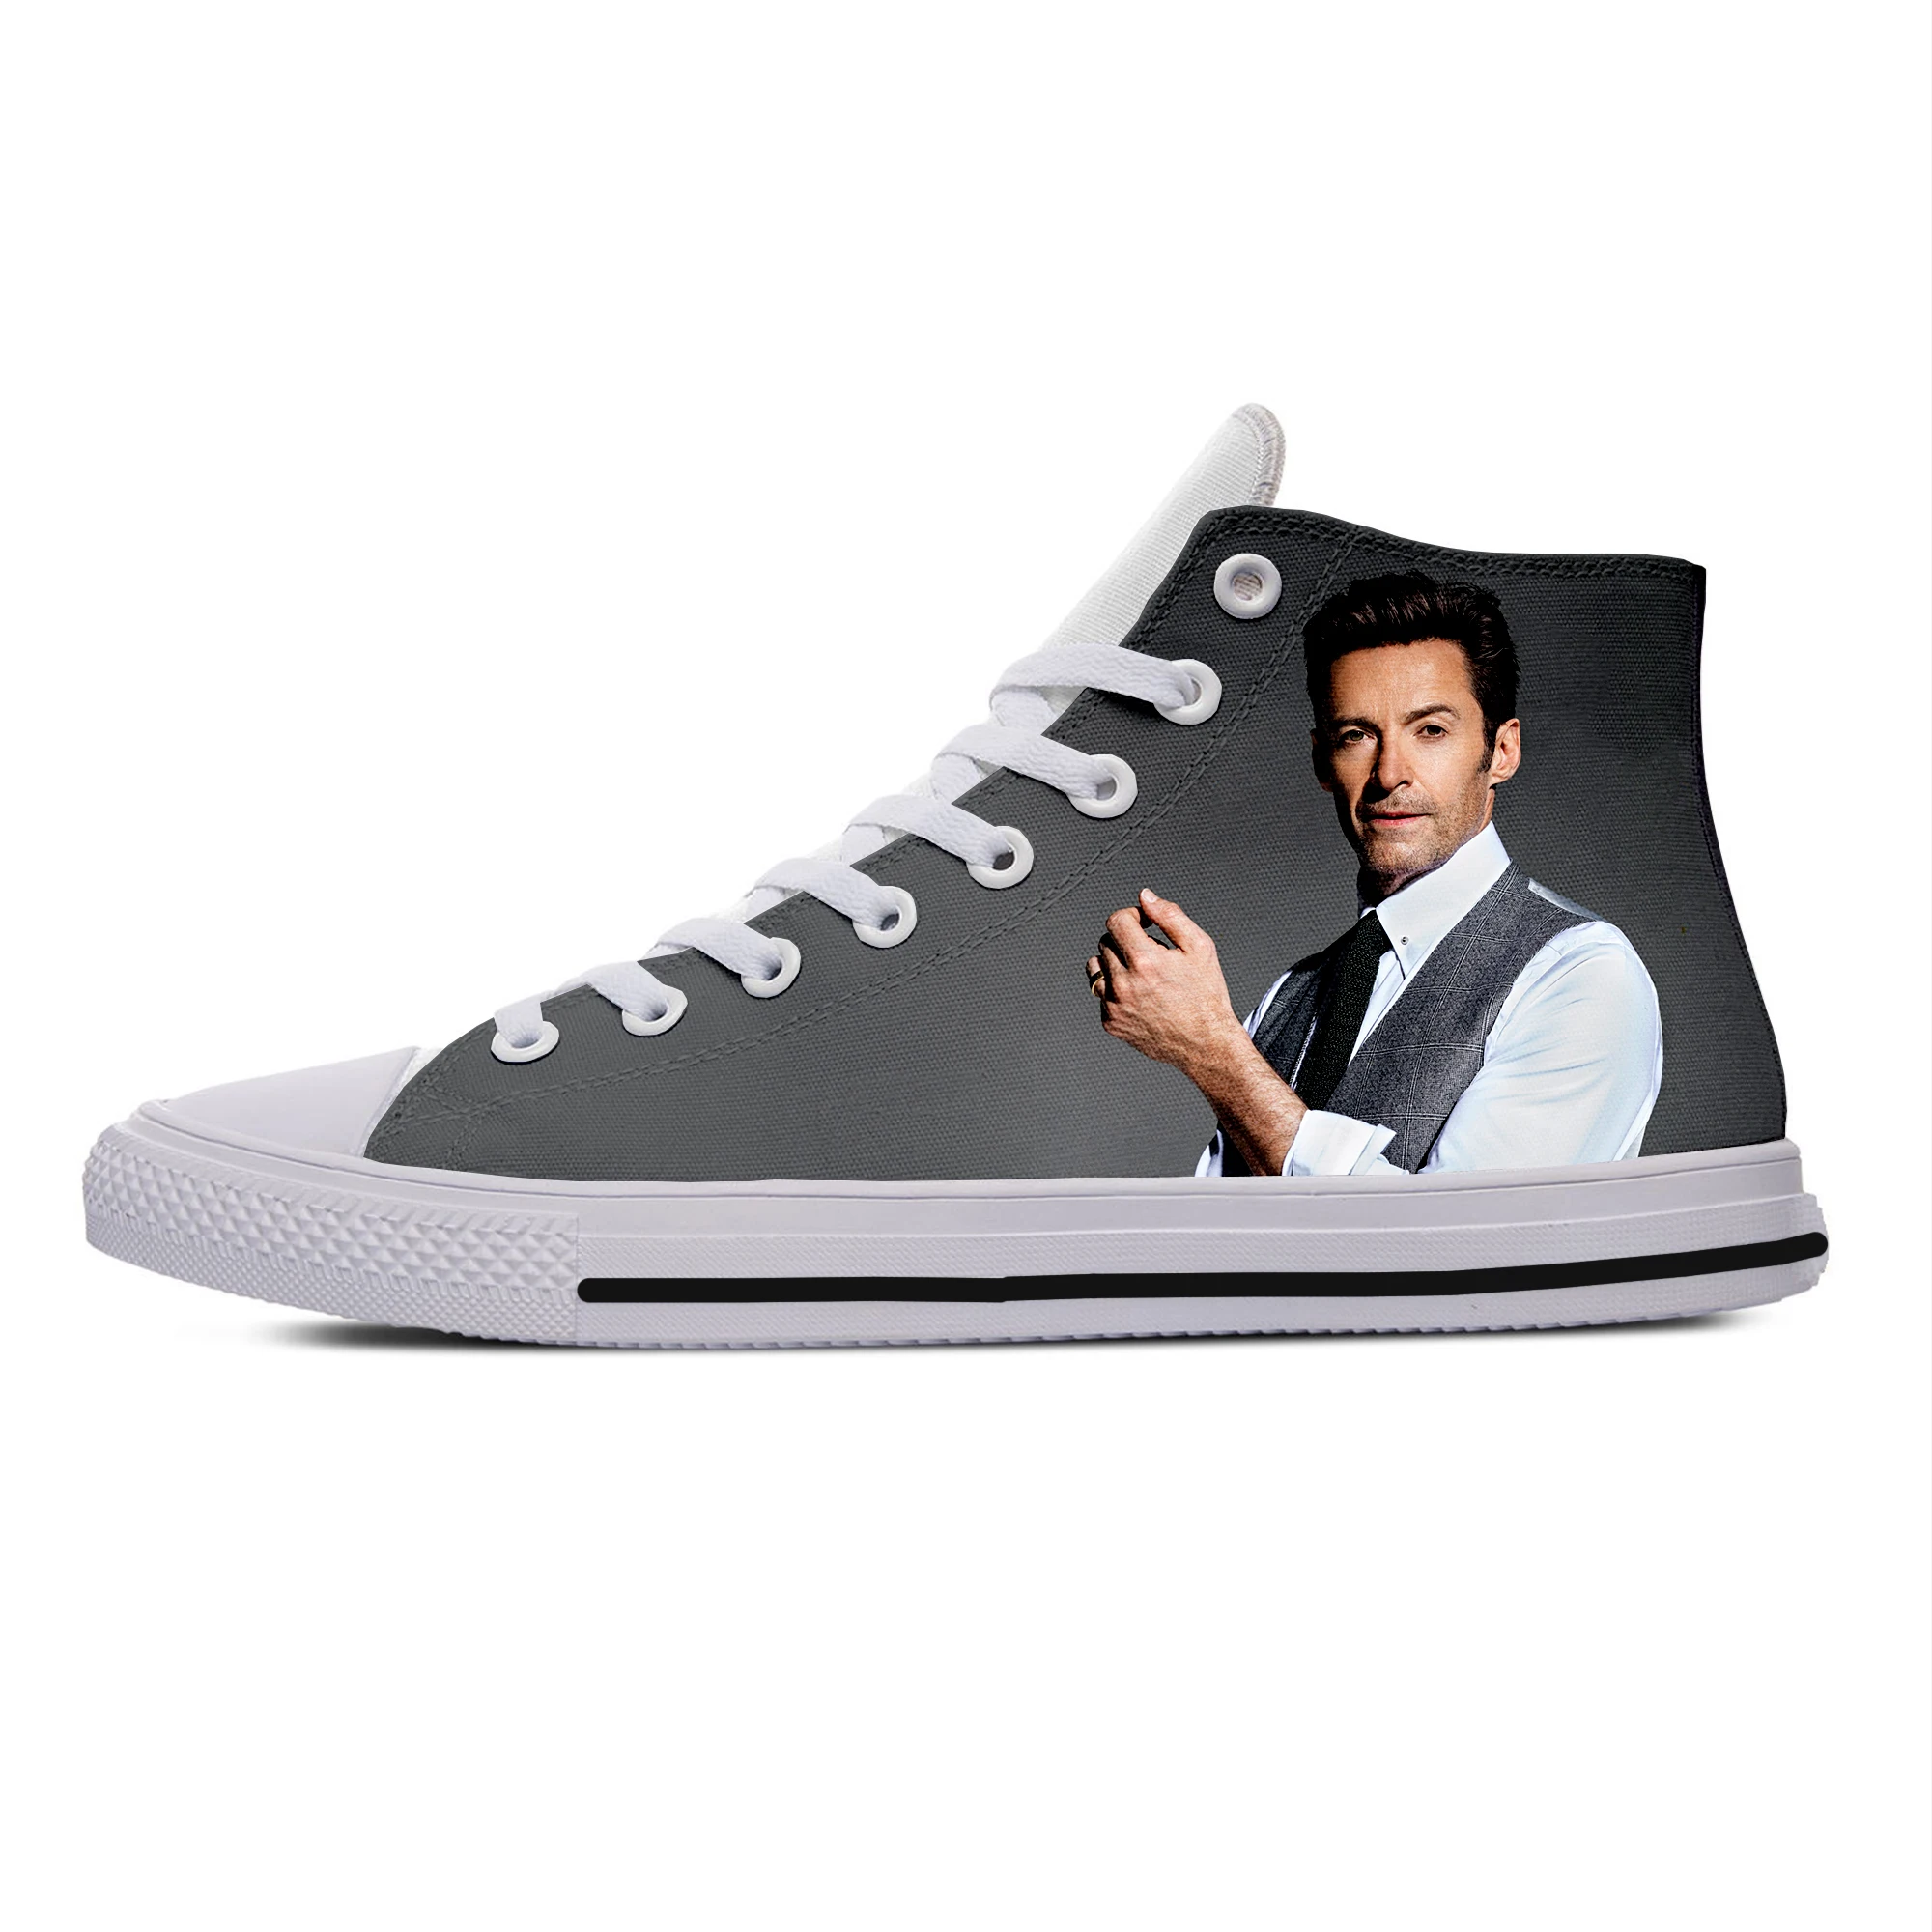 

2019 hot fashion 3D Hugh Jackman High Sneakers for men/women high quality 3D printing handiness casual shoes